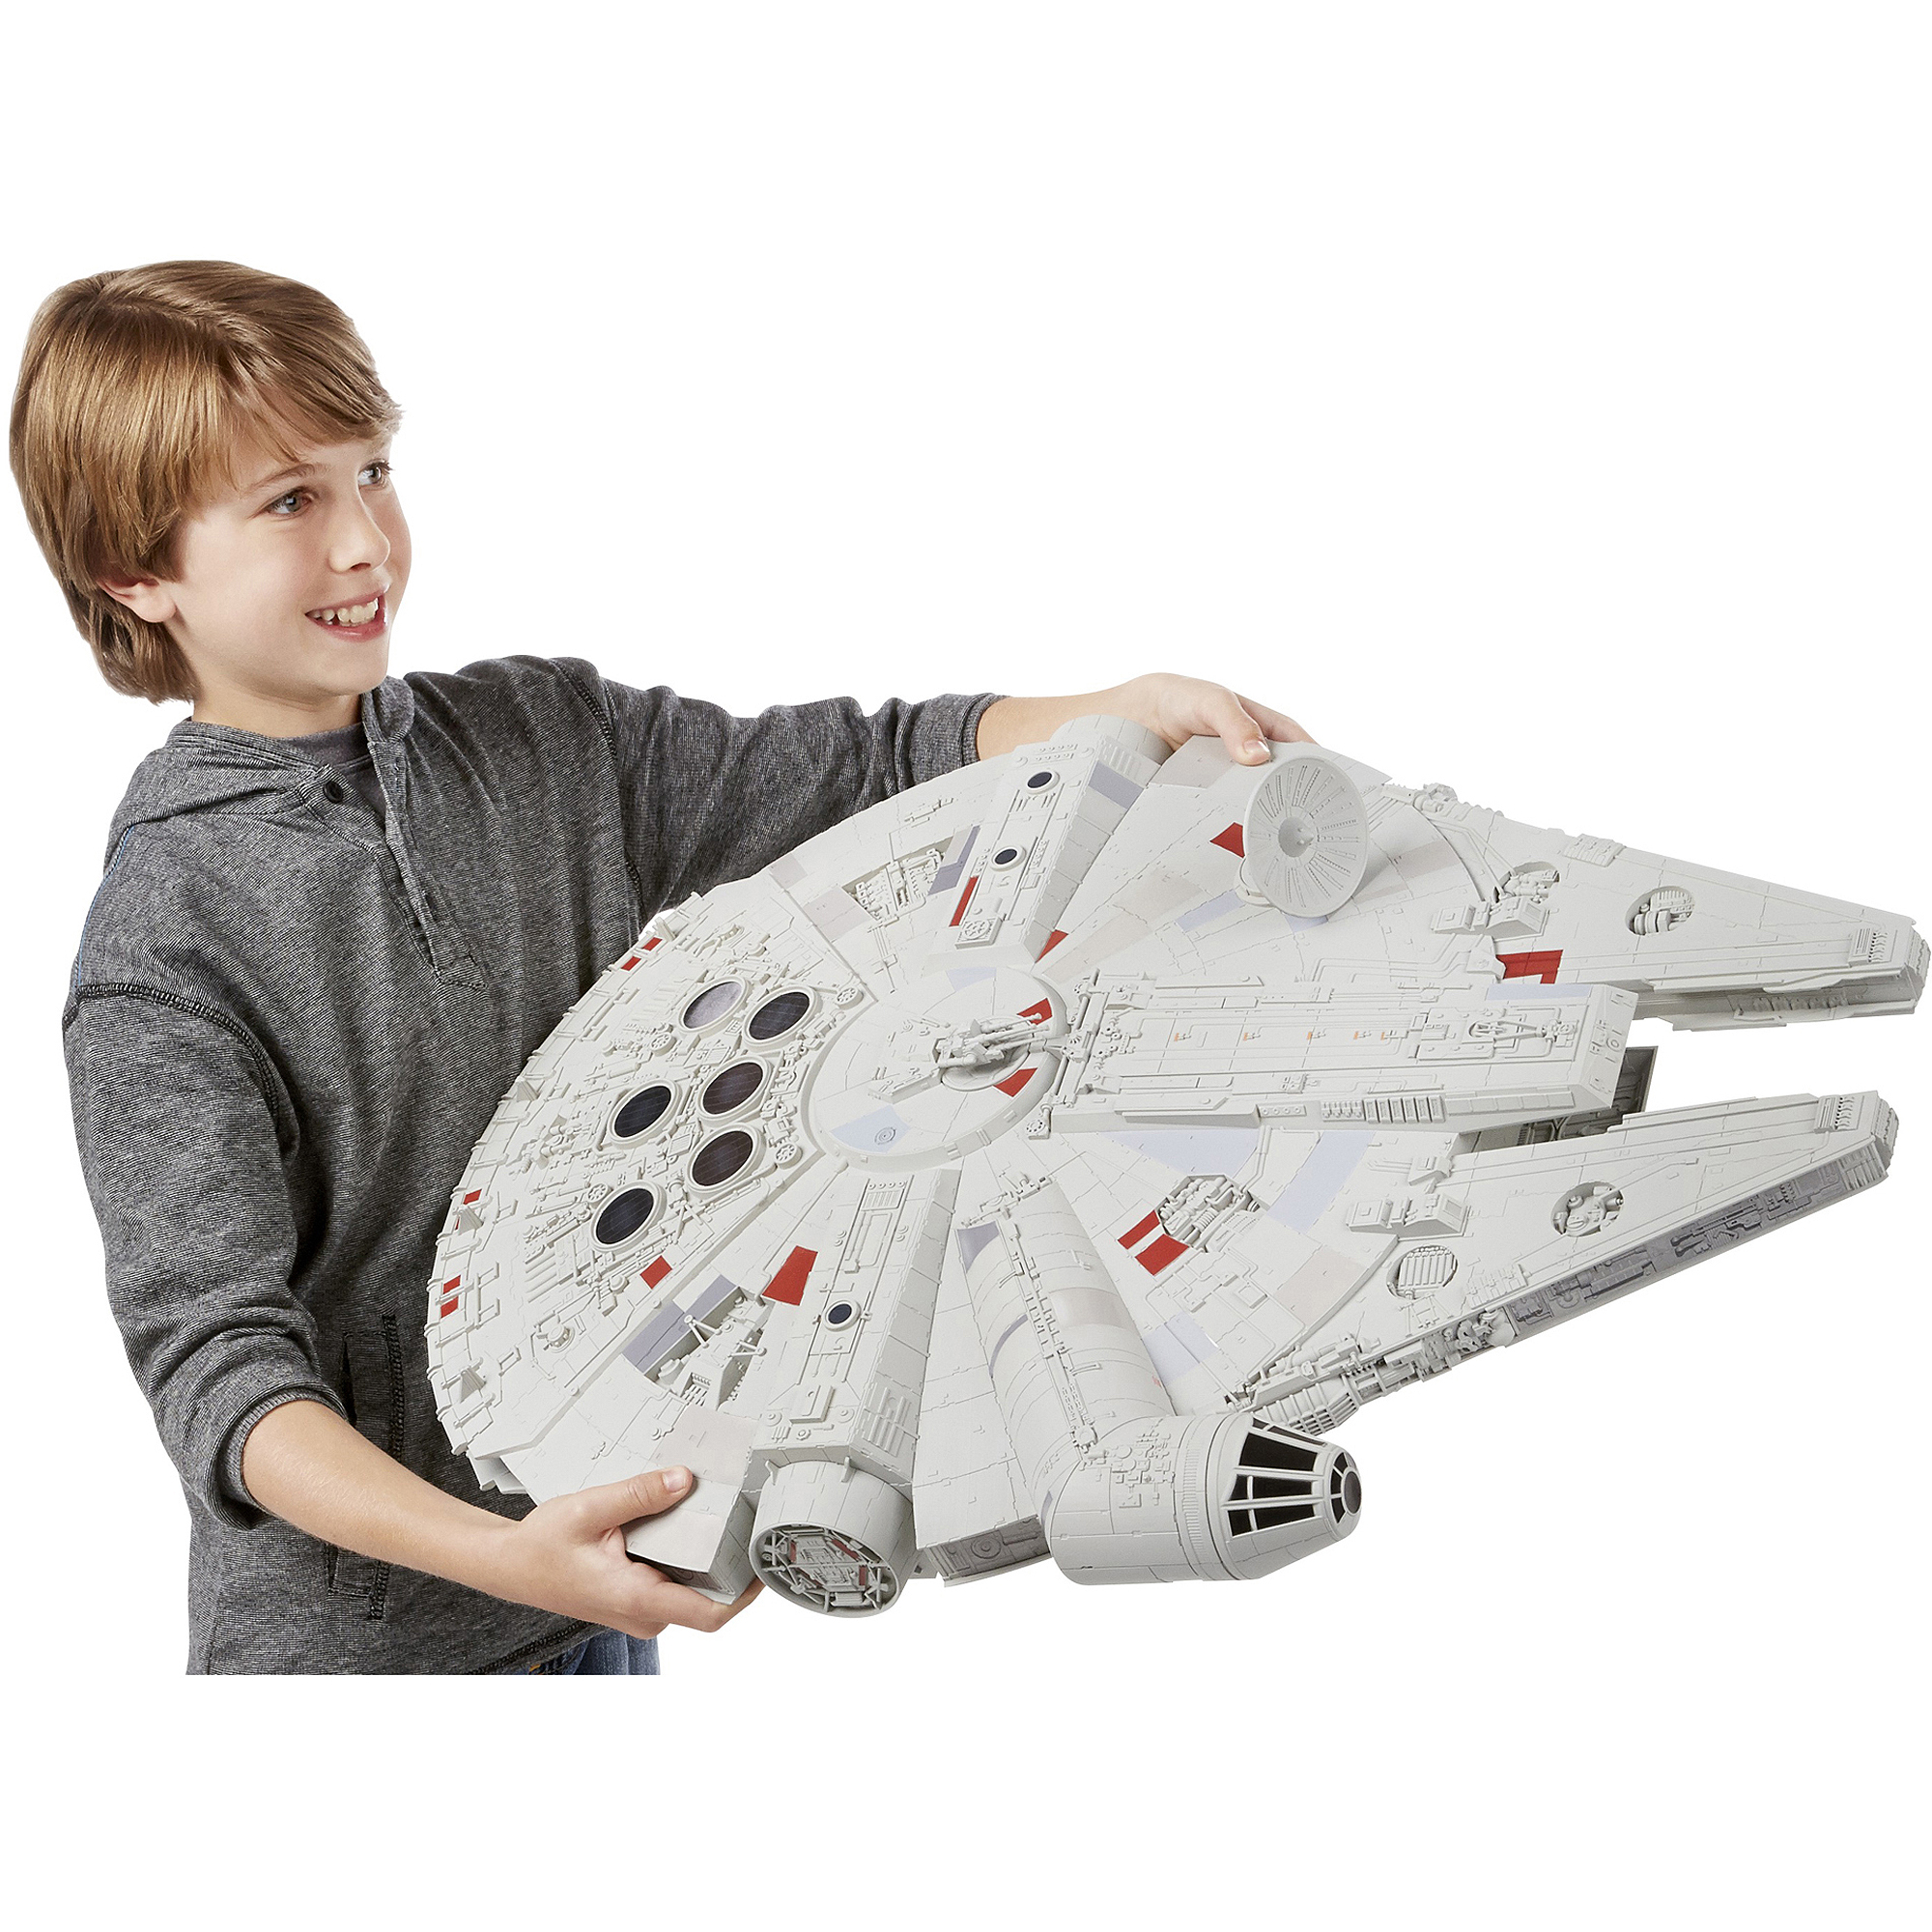 Disney s Star Wars Rebels Millennium Falcon Vehicle by Hasbro - image 5 of 7